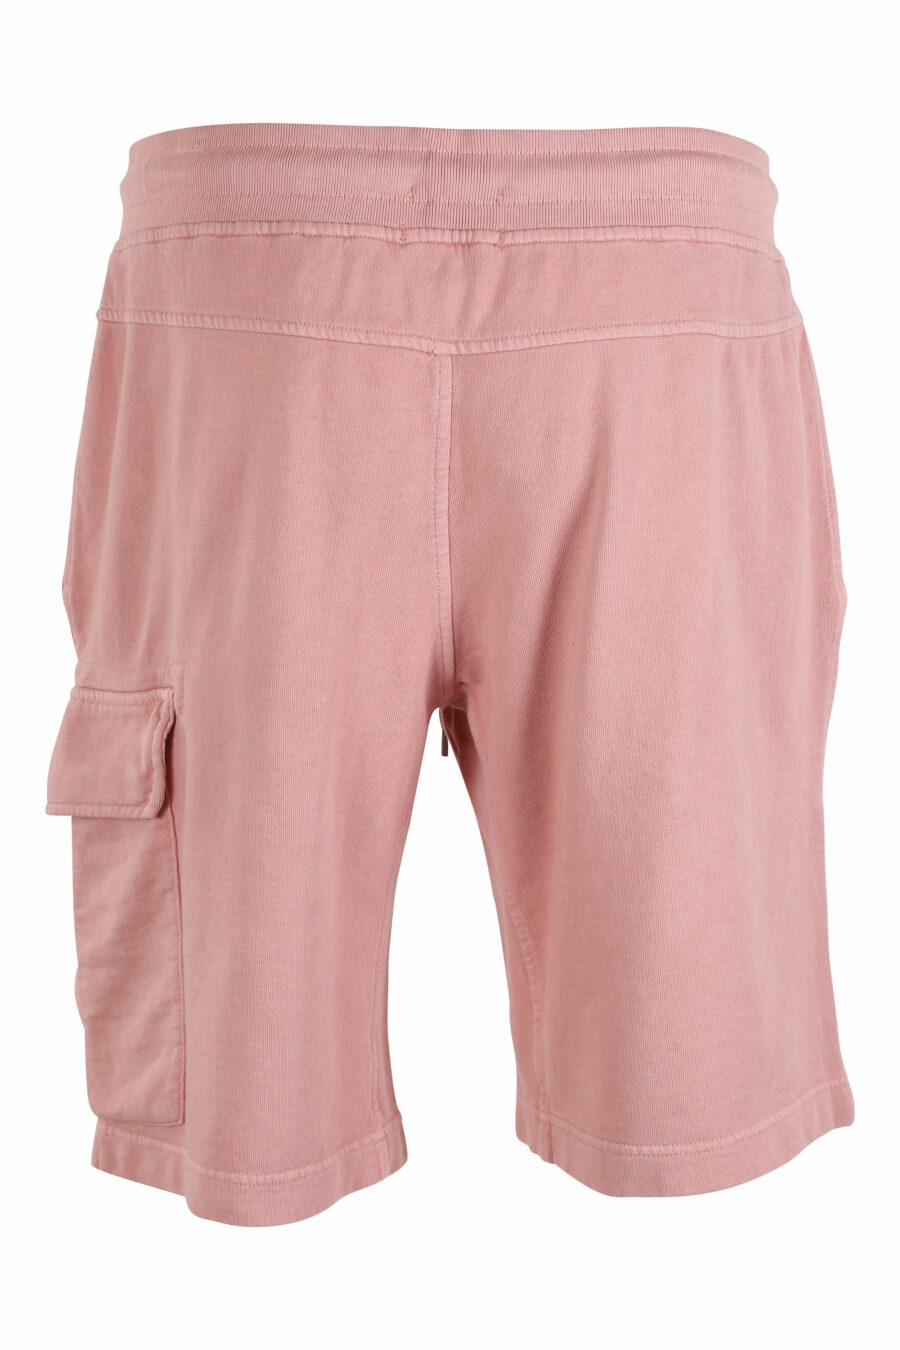 Tracksuit bottoms pink cargo style with circular mini logo - IMG 9521